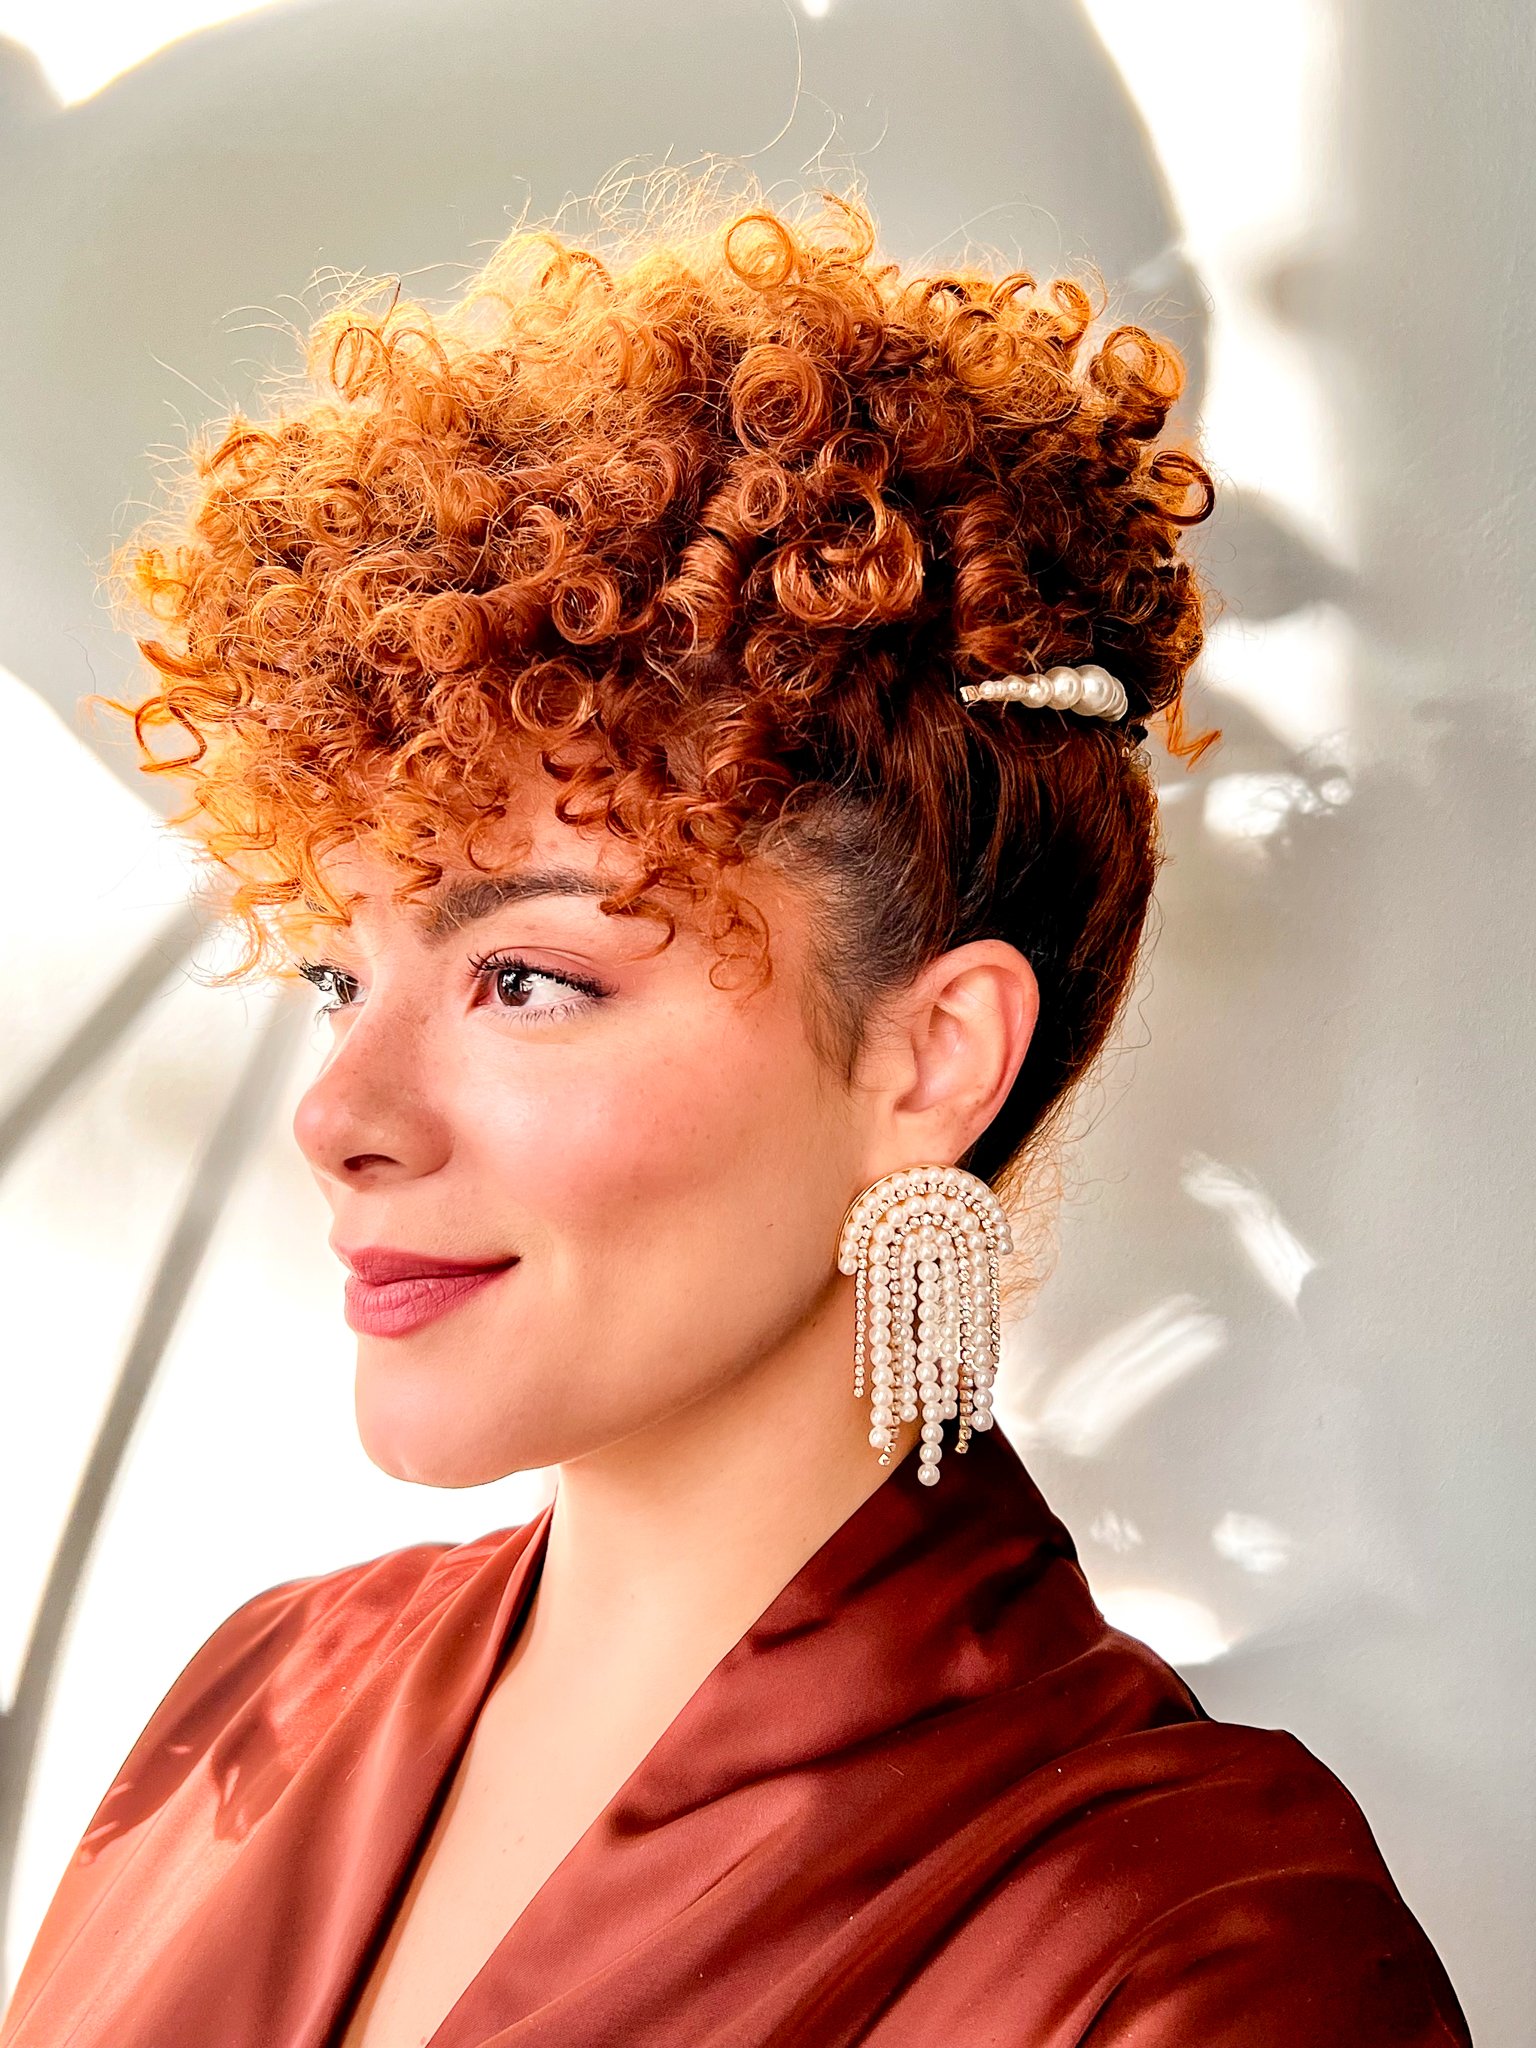 4 Holiday Hairstyle Ideas For Natural Hair Textures | POPSUGAR Beauty